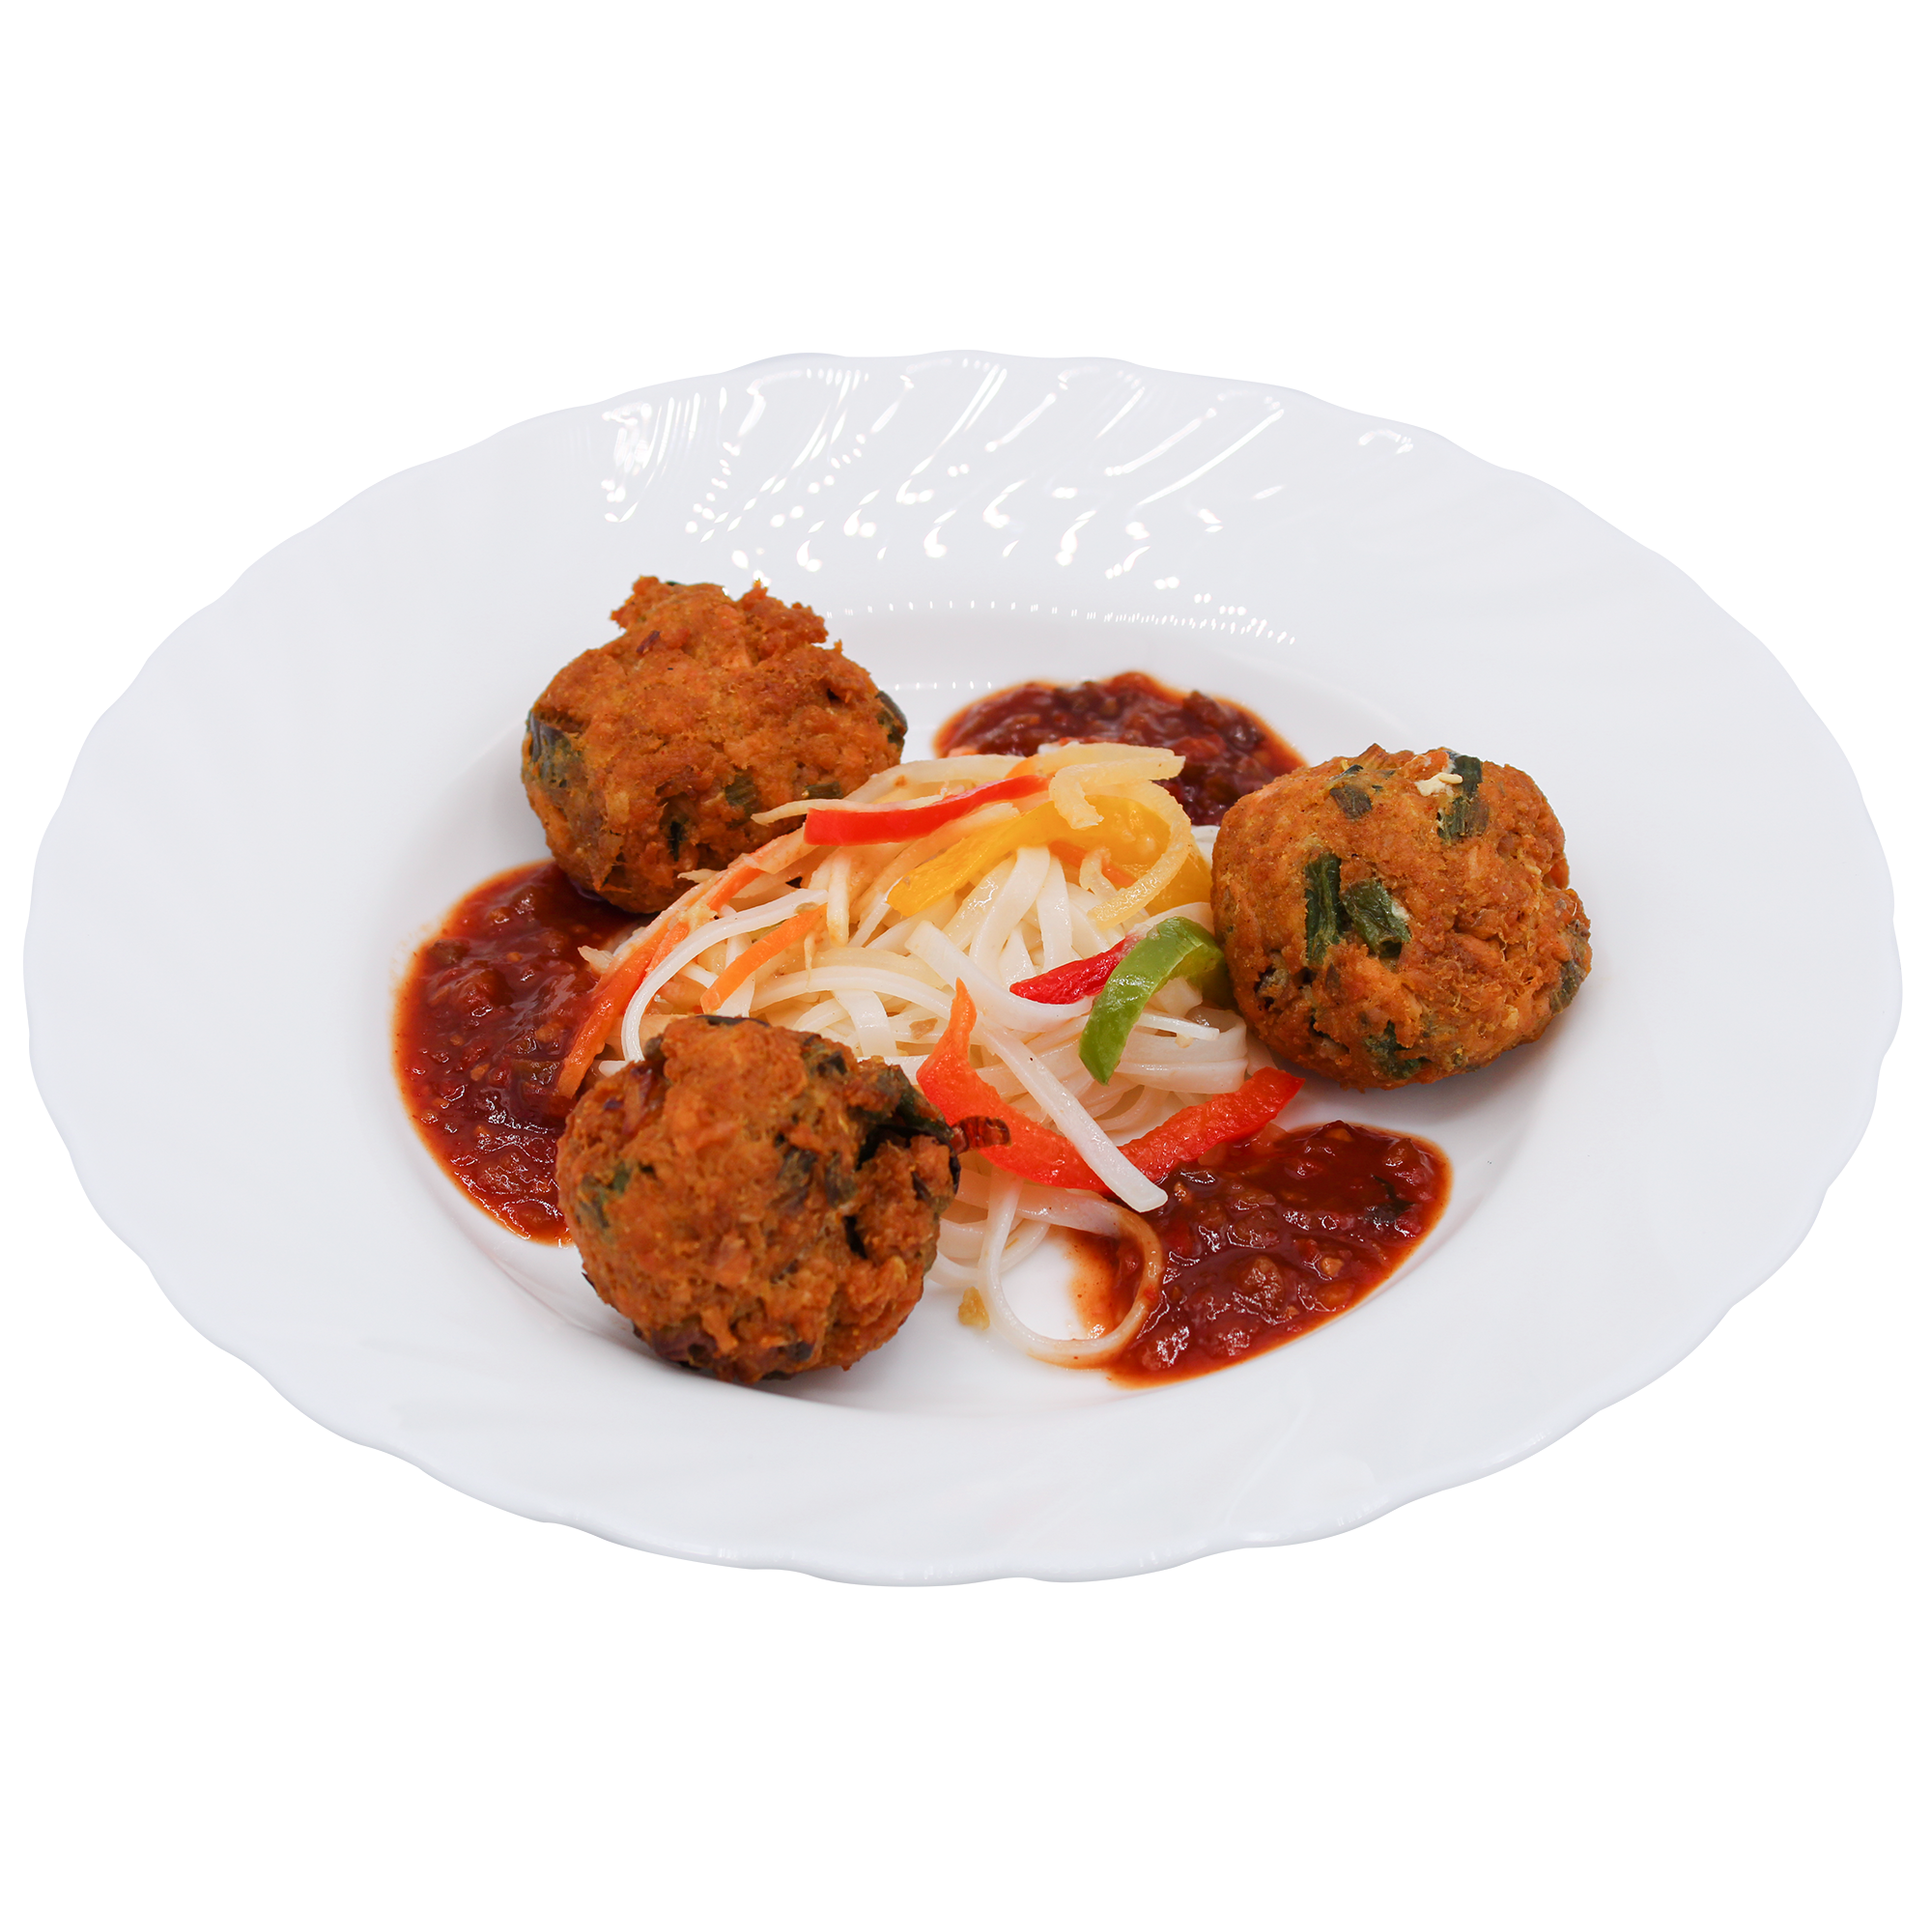 Thai Fish Cake On A Bed Of Rice Noodles With Mexican Salsa Sauce